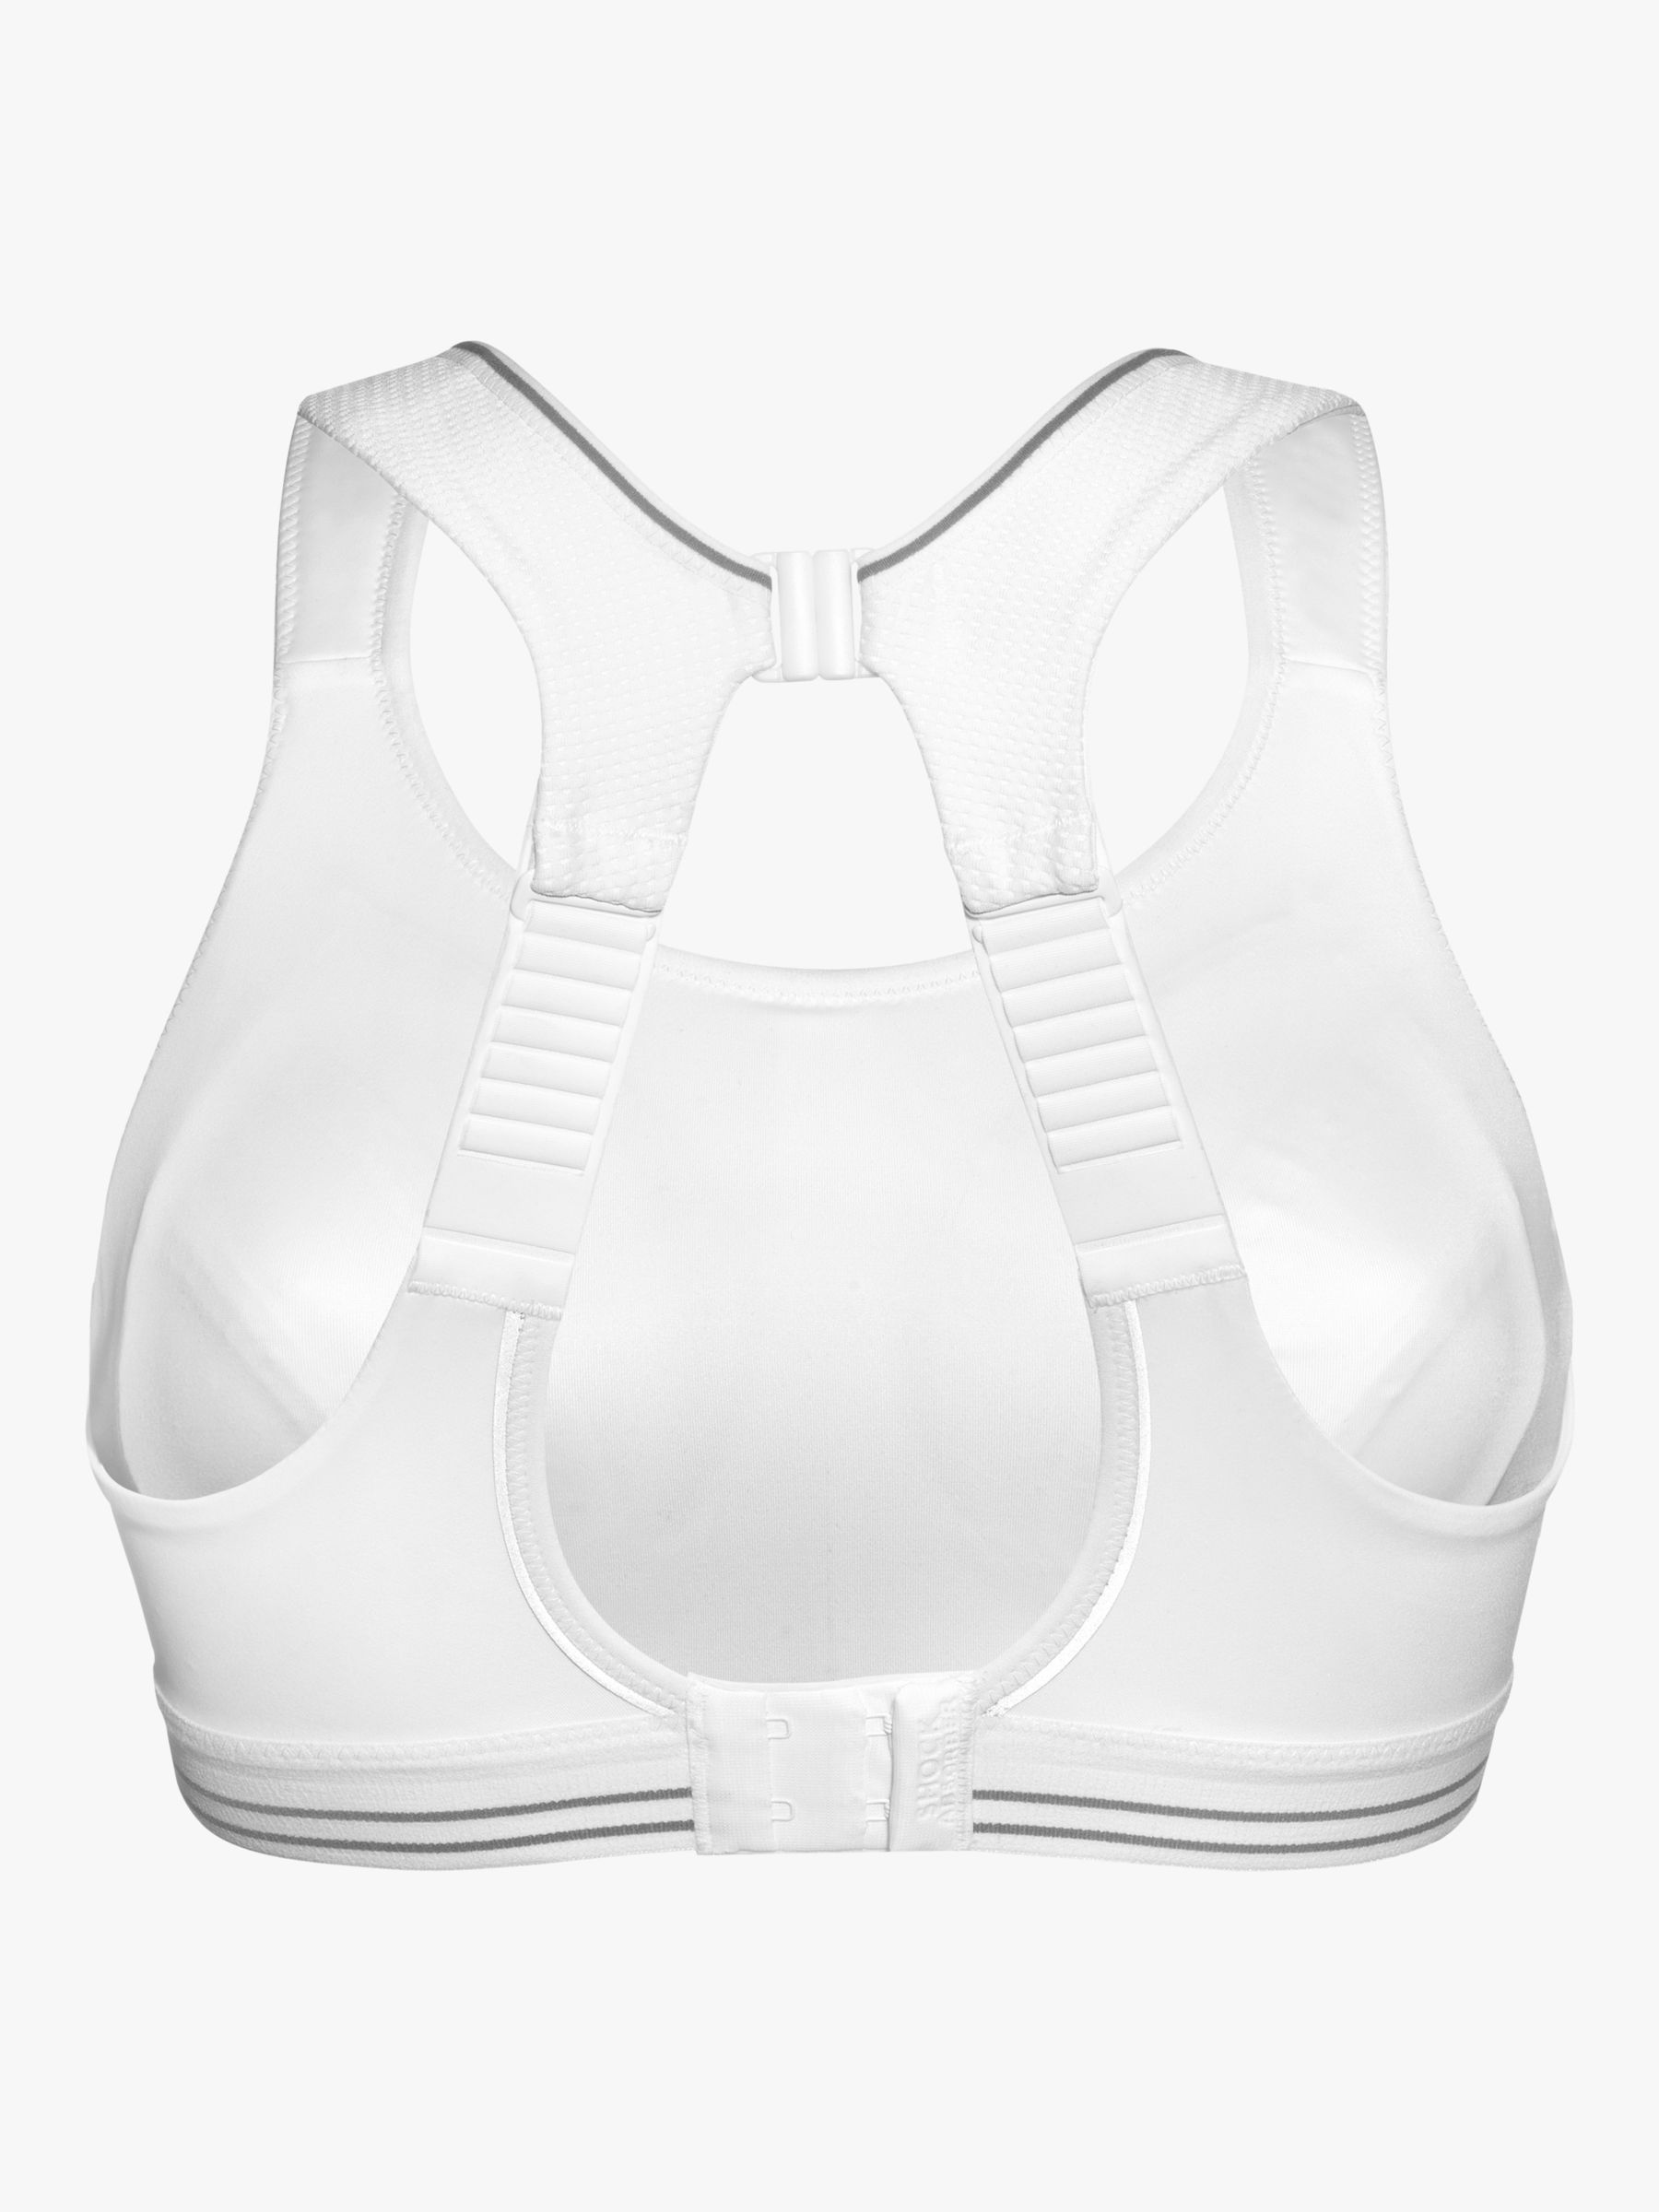 Shock Absorber Ultimate Run Non-Wired Sports Bra, White, 32B